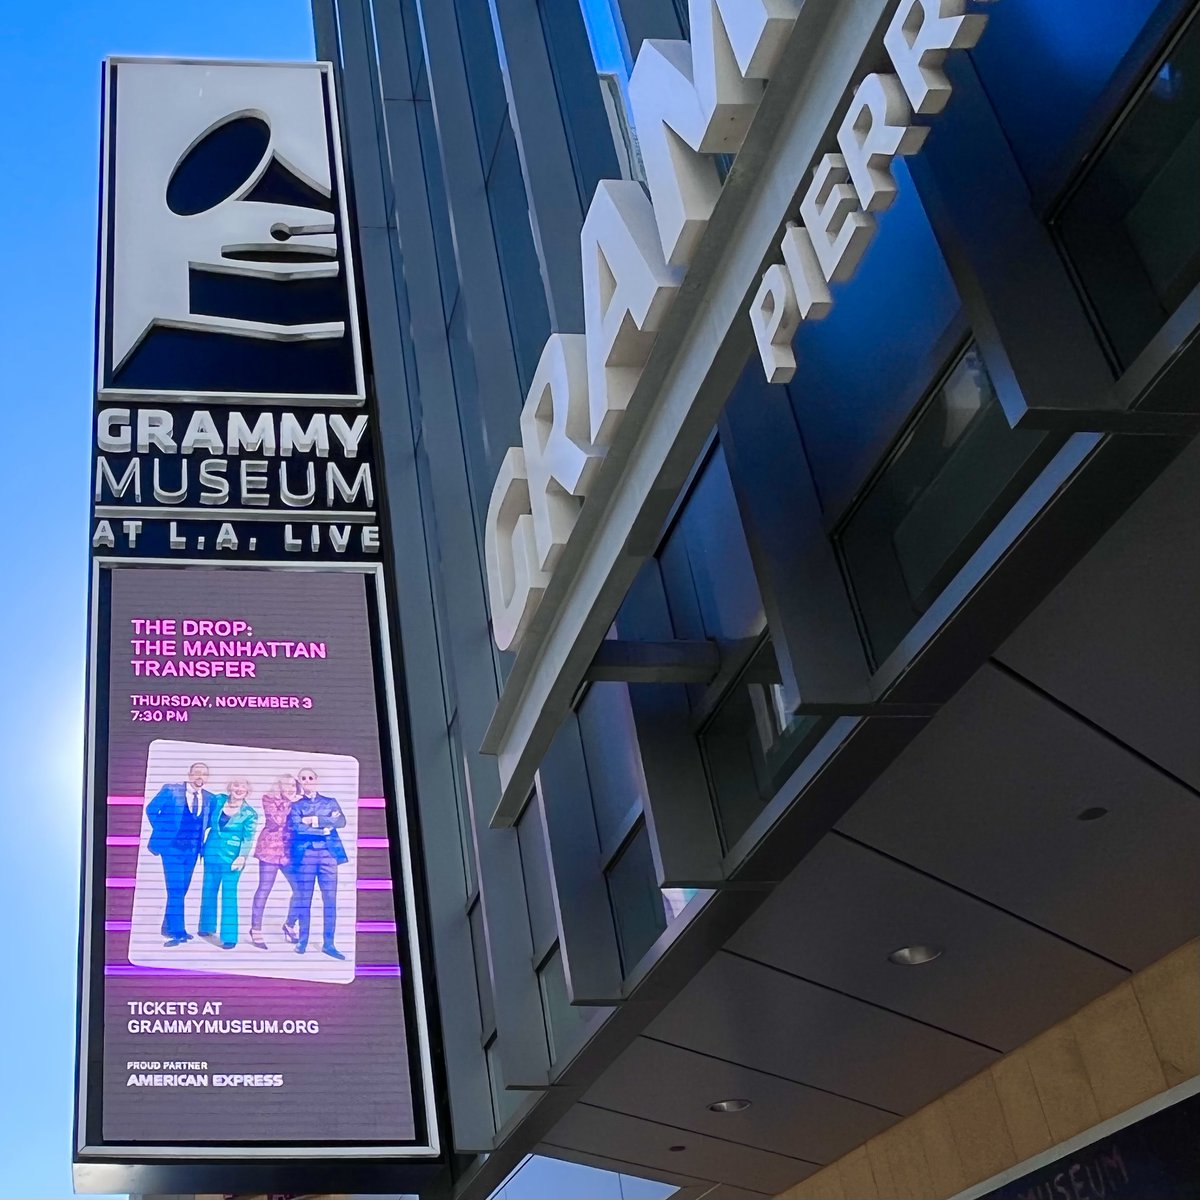 Tonight's the night! The Manhattan Transfer will take the stage at the @GRAMMYMuseum at 7:30pm. Who will be in the audience? 🙋‍♂️🙋‍♀️